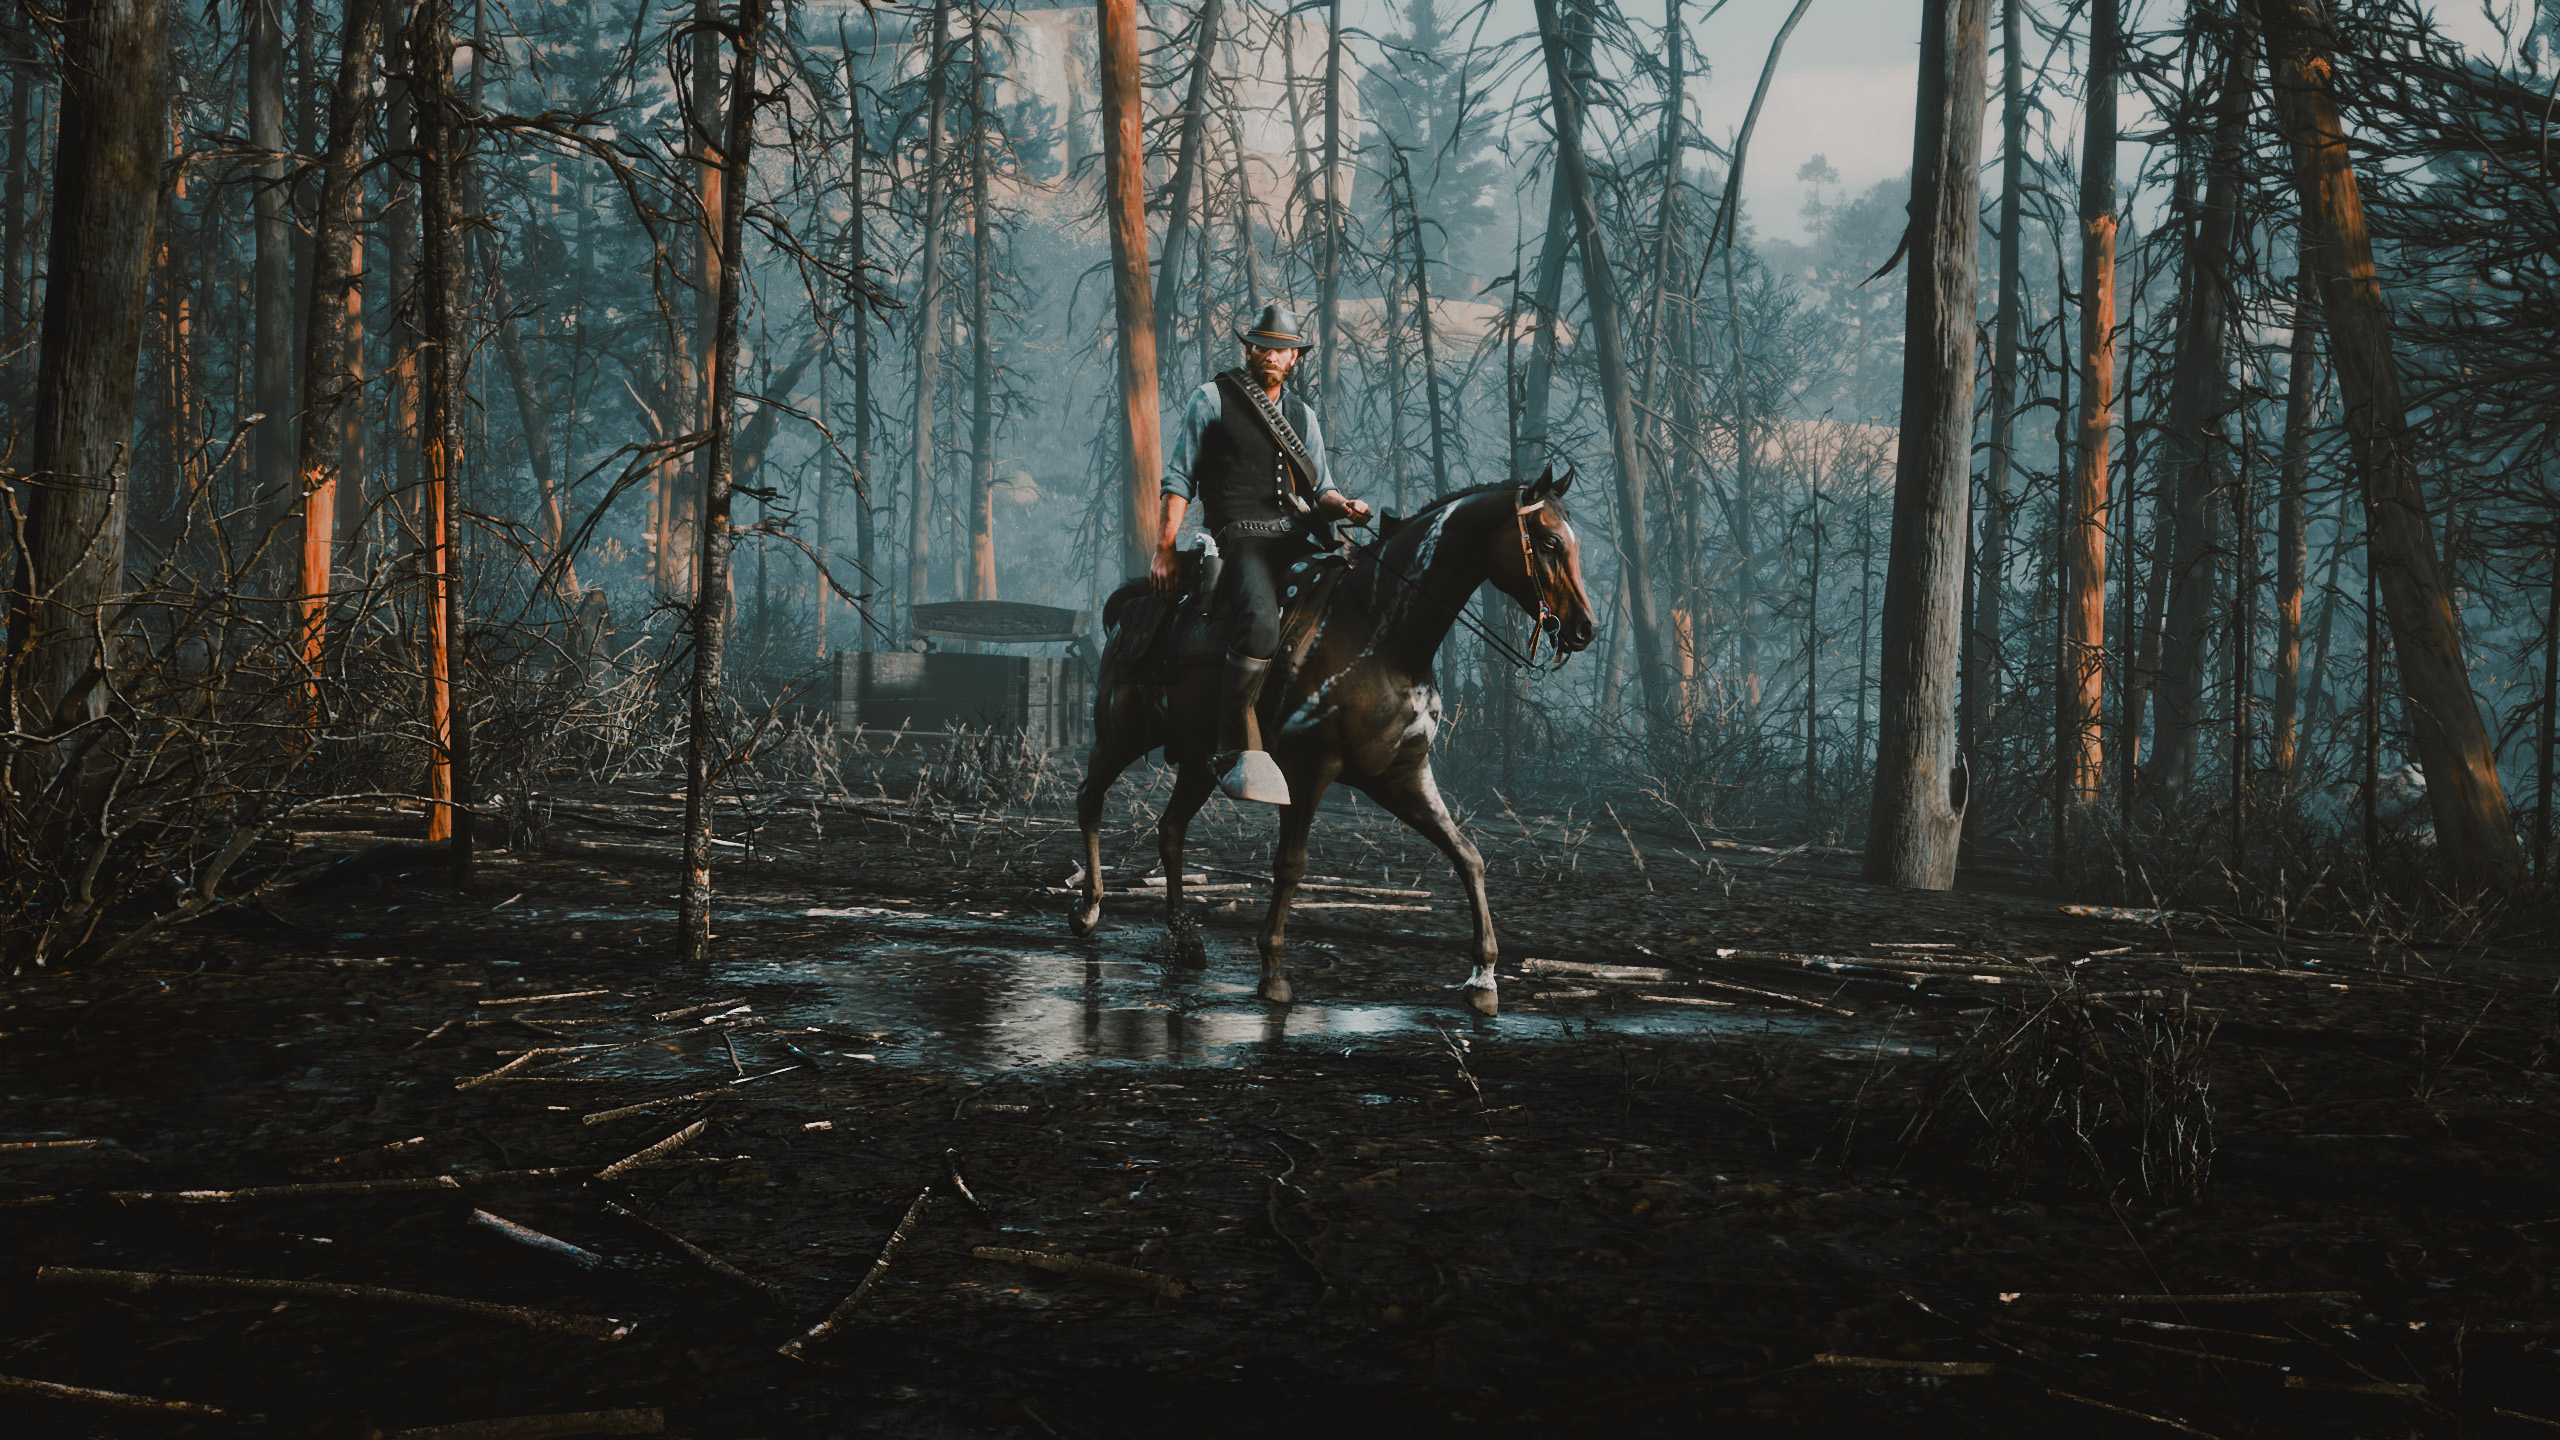 General 2560x1440 game photography Red Dead Redemption 2 Rockstar Games horse animals cowboy PC gaming horseback video game characters CGI video game art screen shot video games dead trees nature cowboy hats water